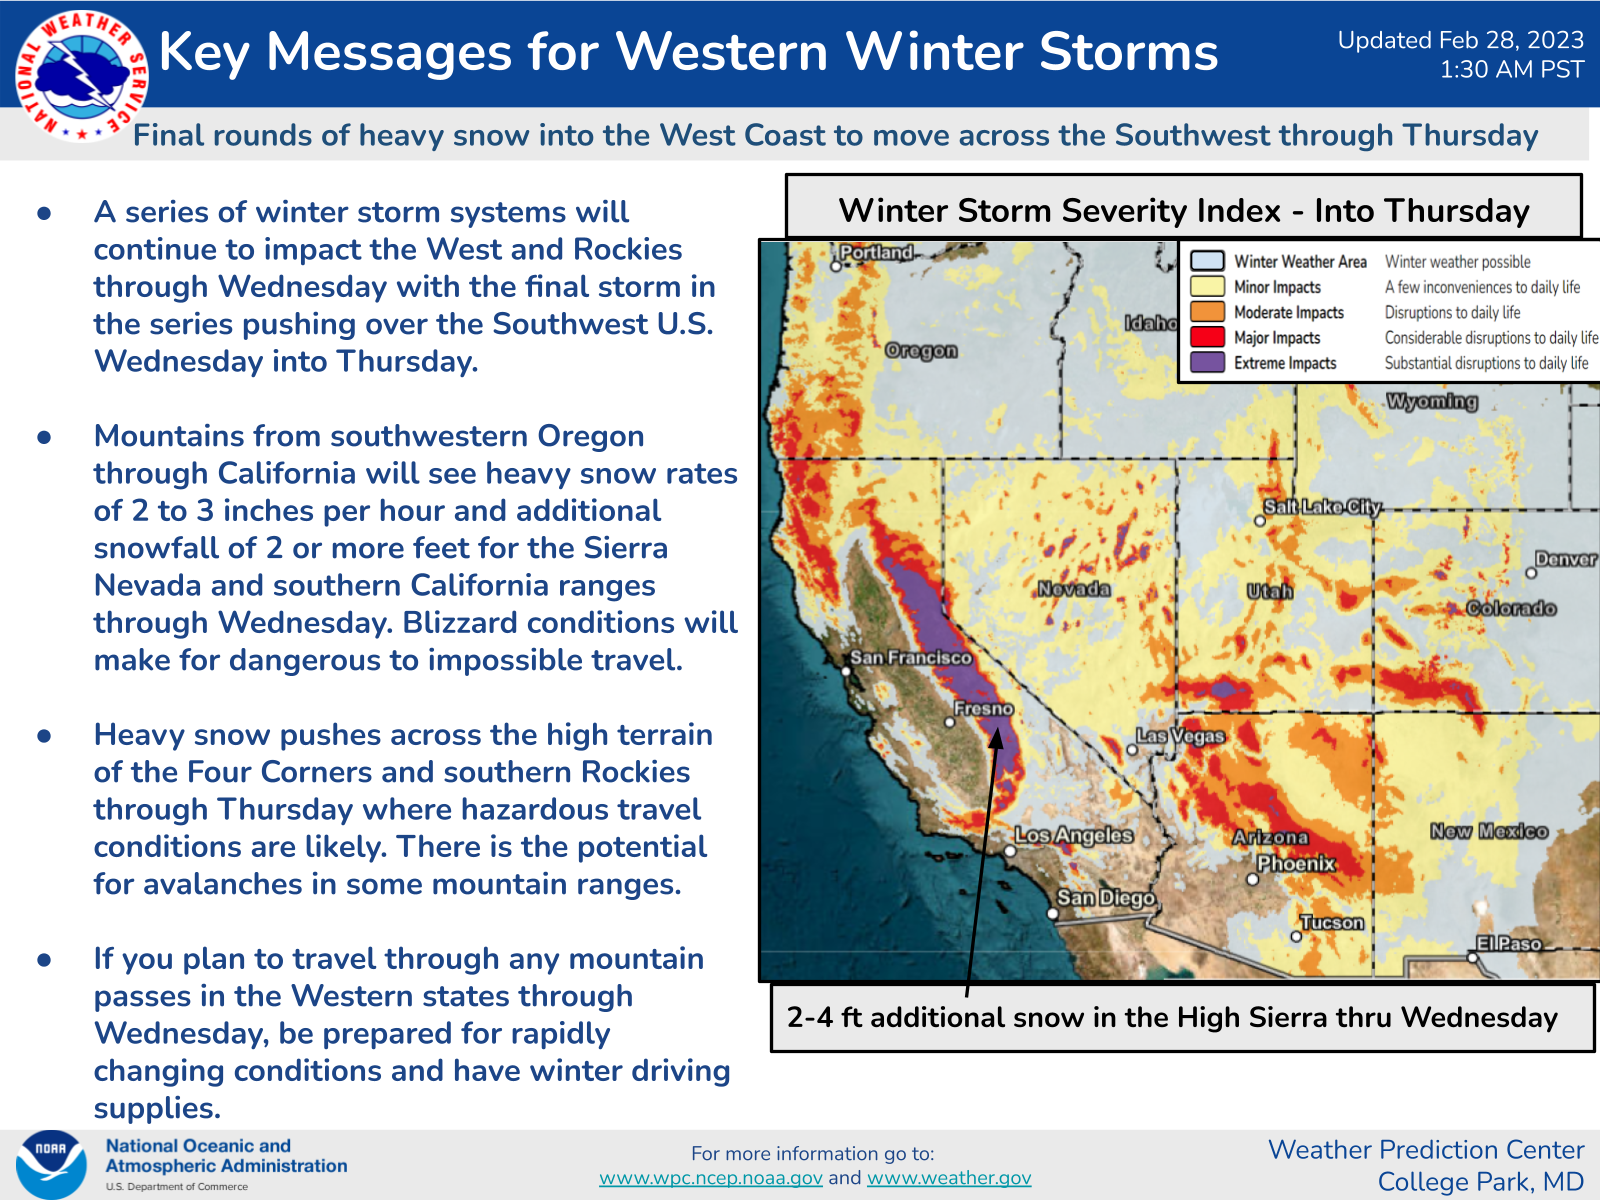 Key Messages For Western Winter Storms